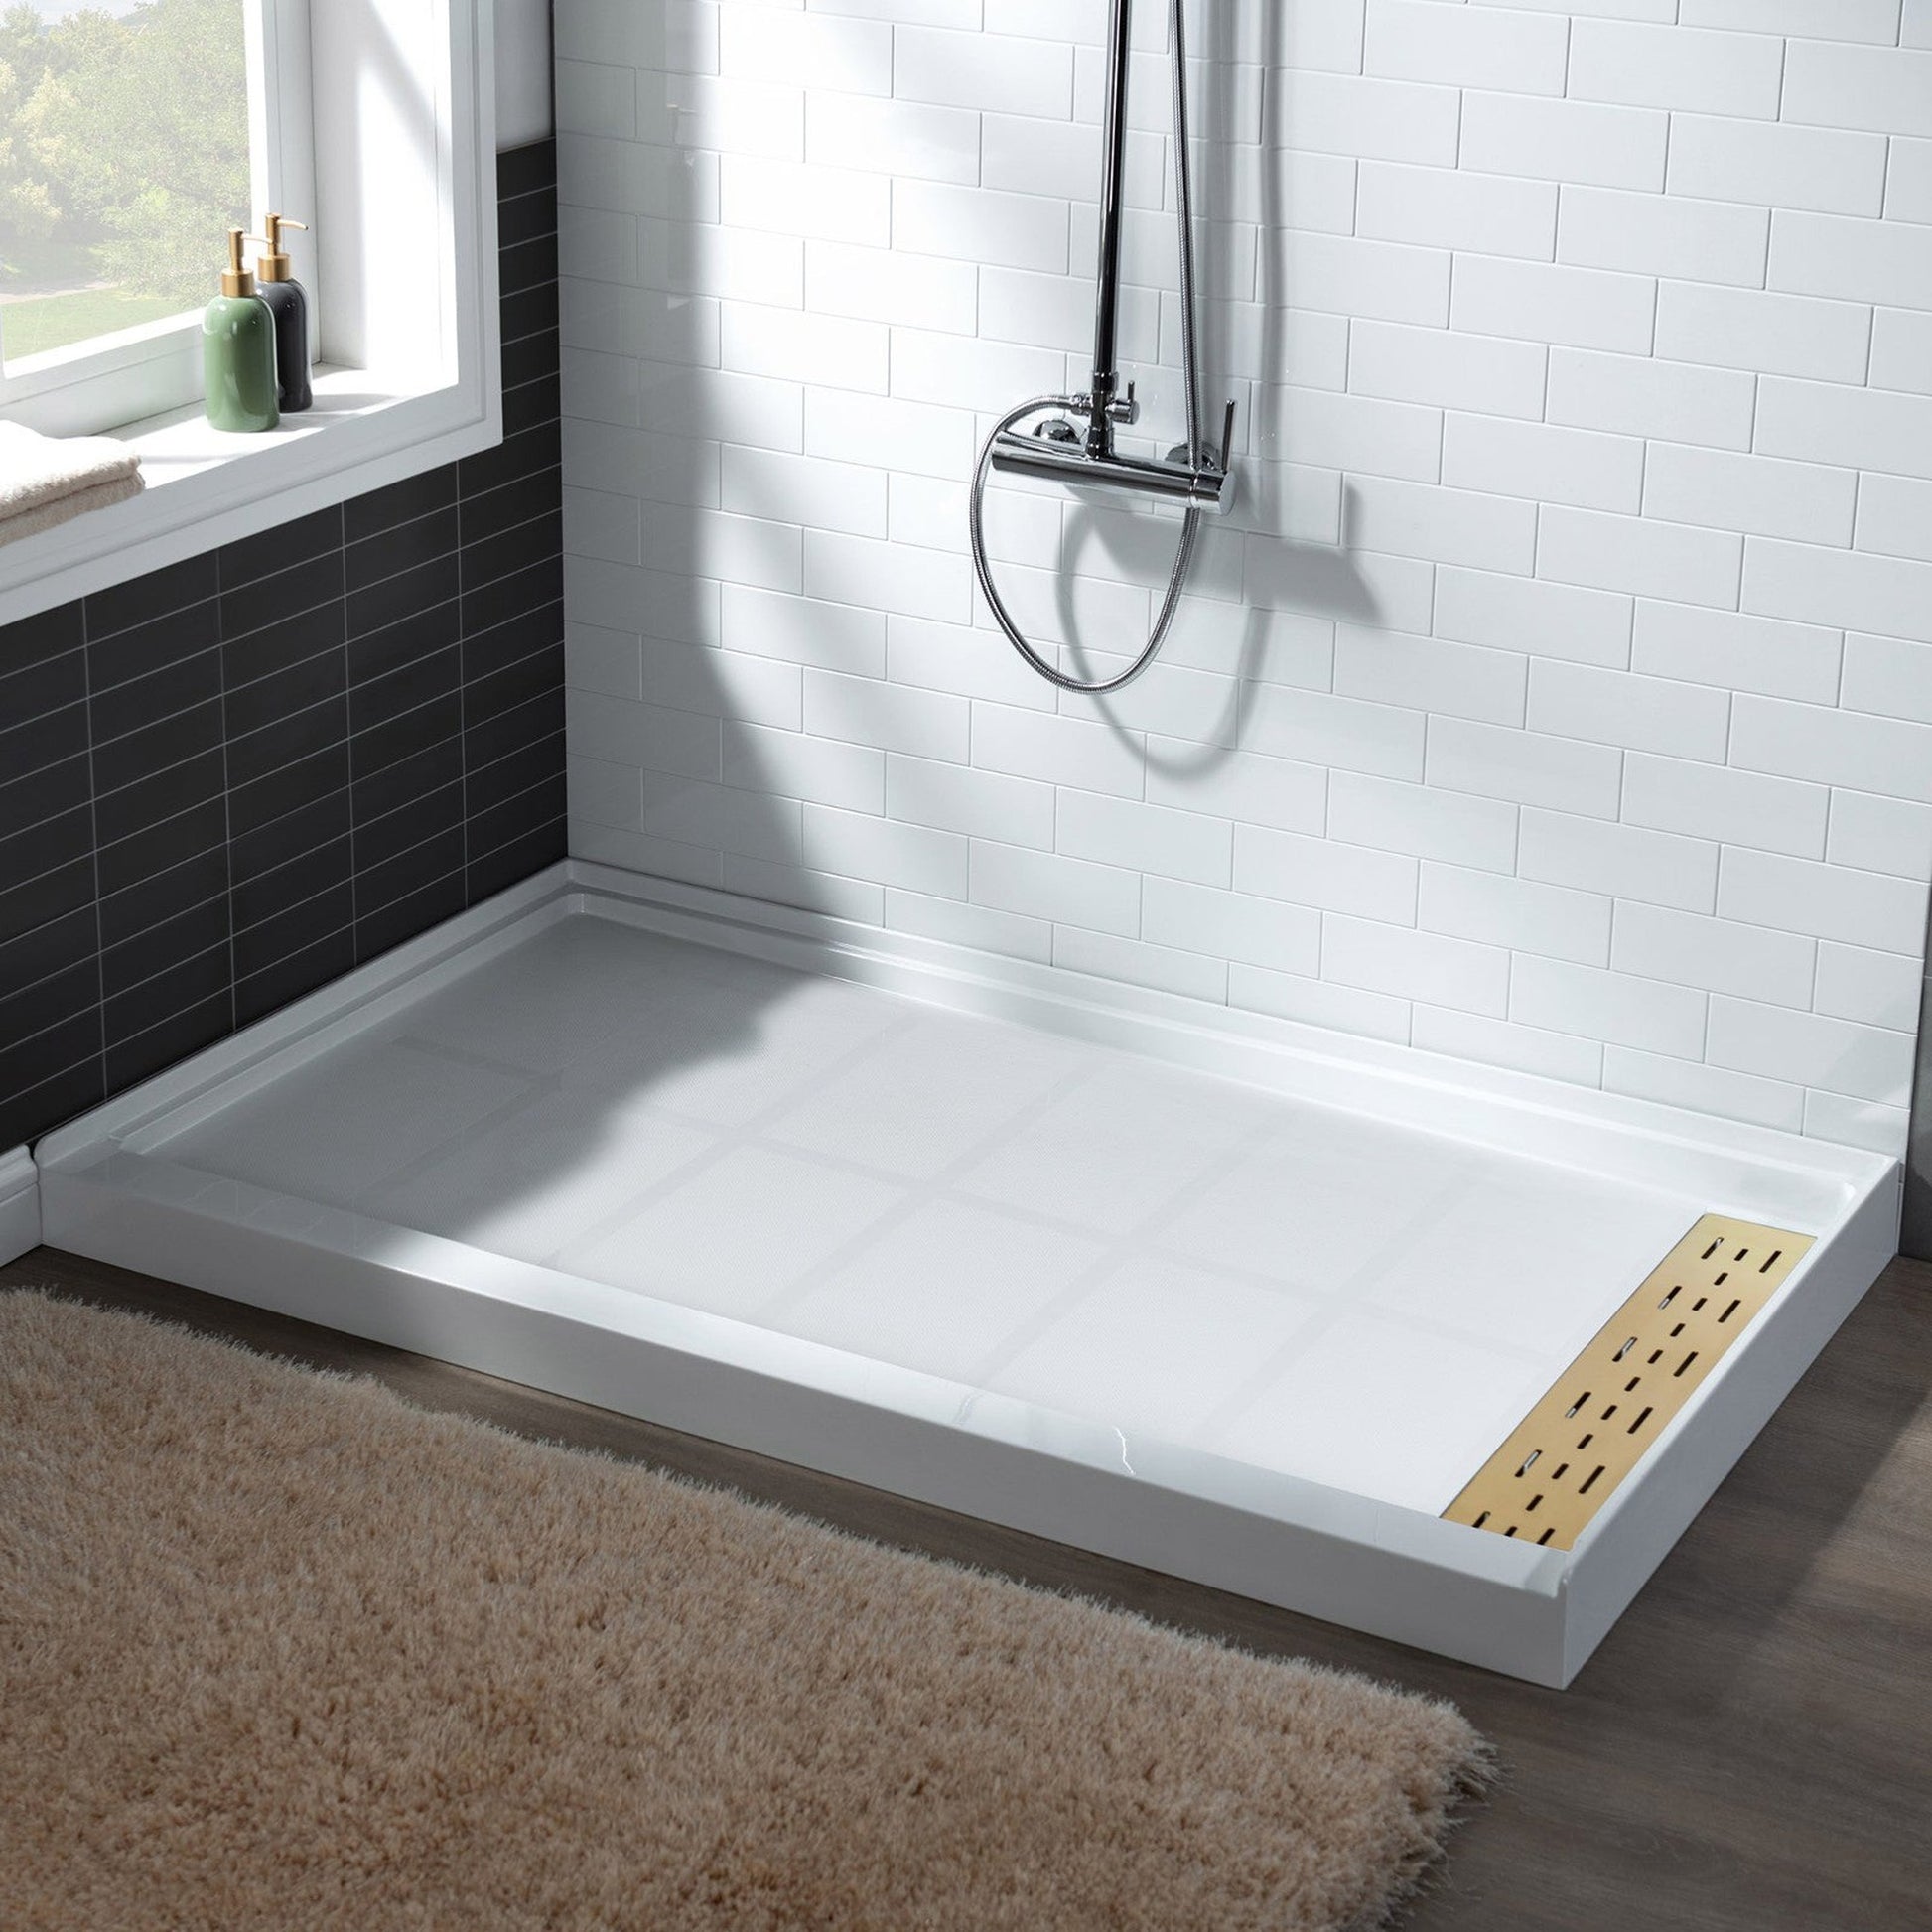 WoodBridge 60" x 30" White Solid Surface Shower Base Right Drain Location With Brushed Gold Trench Drain Cover